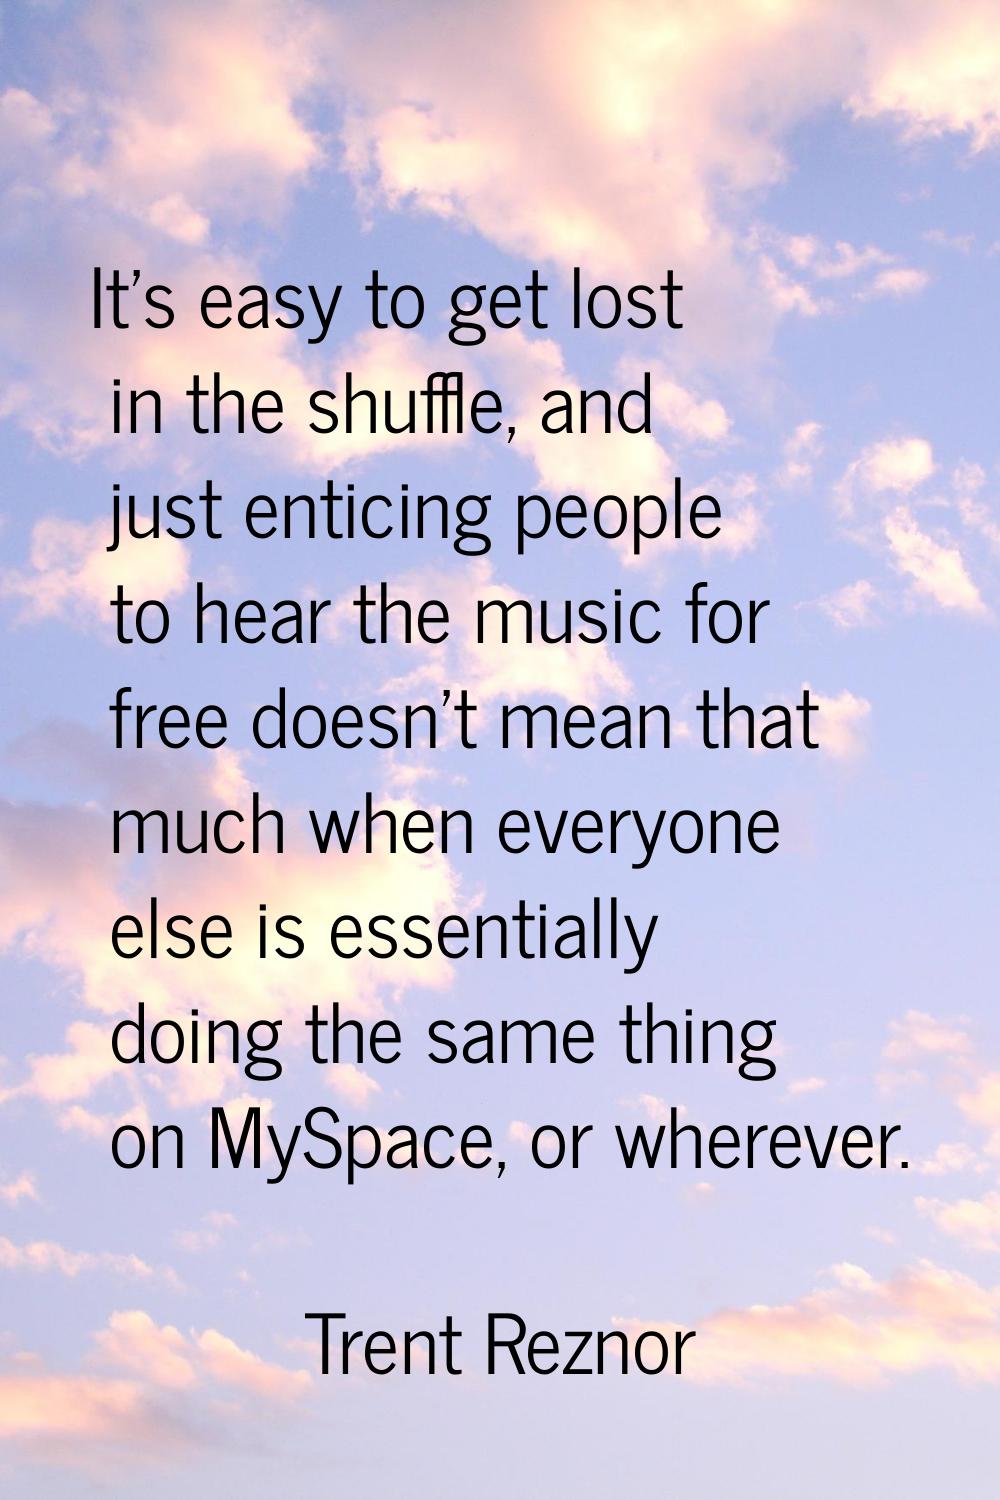 It's easy to get lost in the shuffle, and just enticing people to hear the music for free doesn't m